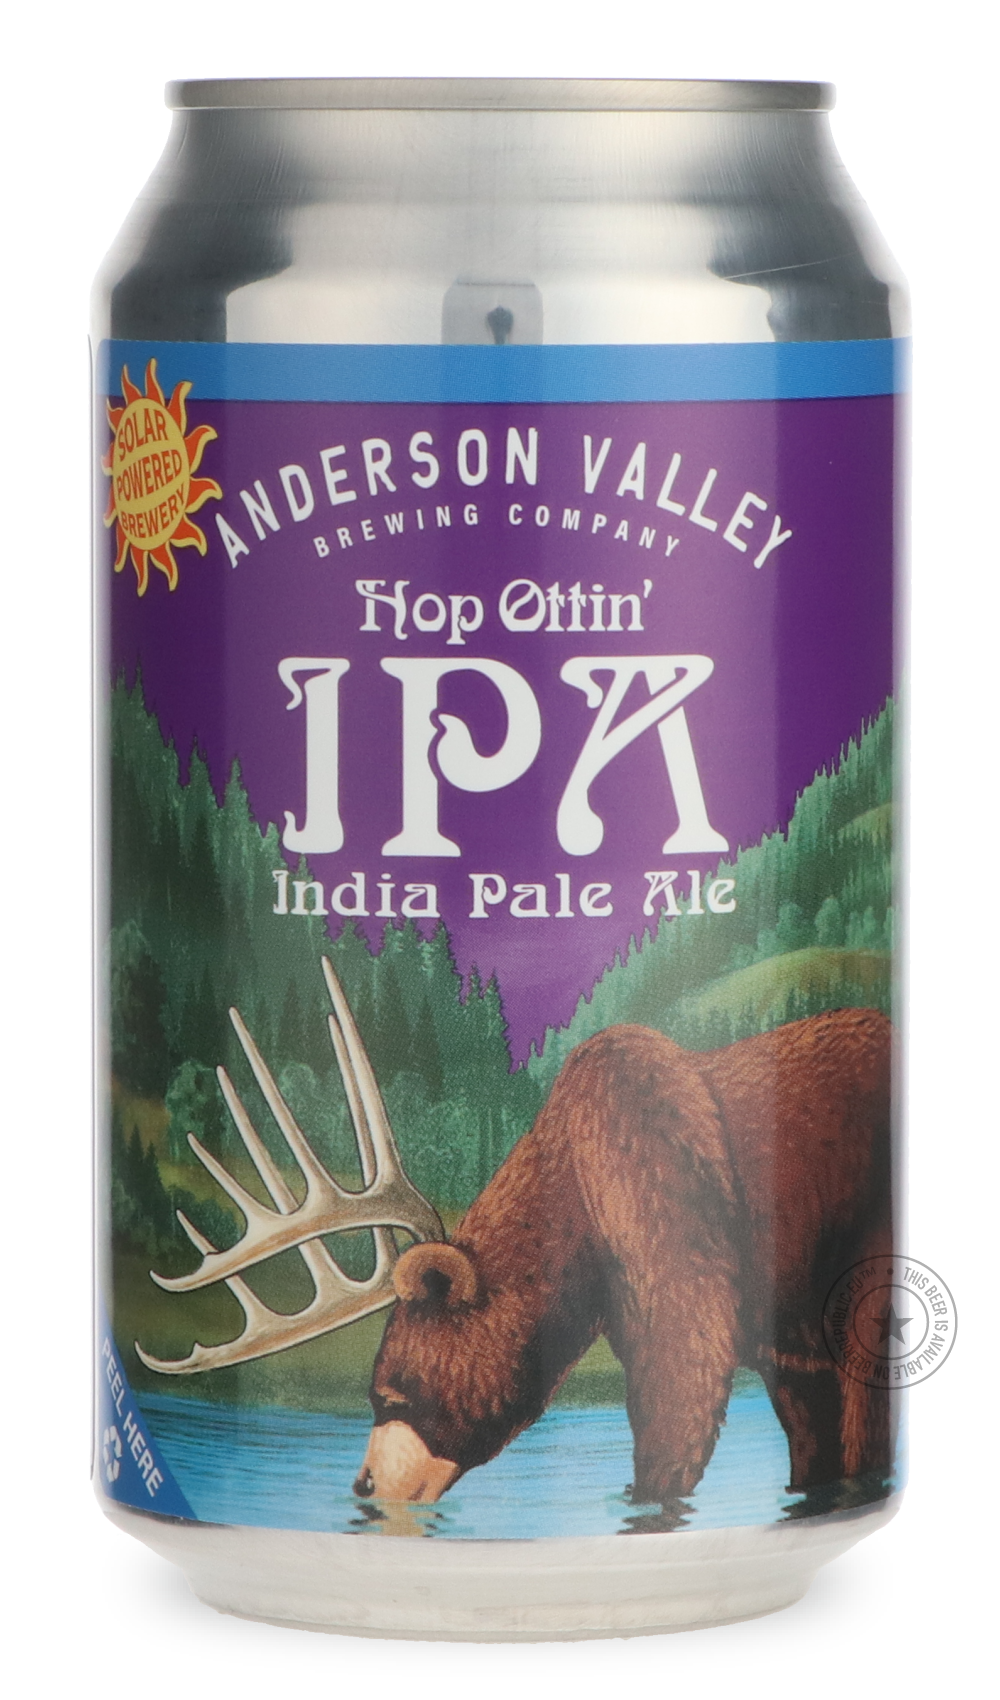 -Anderson Valley- Hop Ottin'-IPA- Only @ Beer Republic - The best online beer store for American & Canadian craft beer - Buy beer online from the USA and Canada - Bier online kopen - Amerikaans bier kopen - Craft beer store - Craft beer kopen - Amerikanisch bier kaufen - Bier online kaufen - Acheter biere online - IPA - Stout - Porter - New England IPA - Hazy IPA - Imperial Stout - Barrel Aged - Barrel Aged Imperial Stout - Brown - Dark beer - Blond - Blonde - Pilsner - Lager - Wheat - Weizen - Amber - Barl